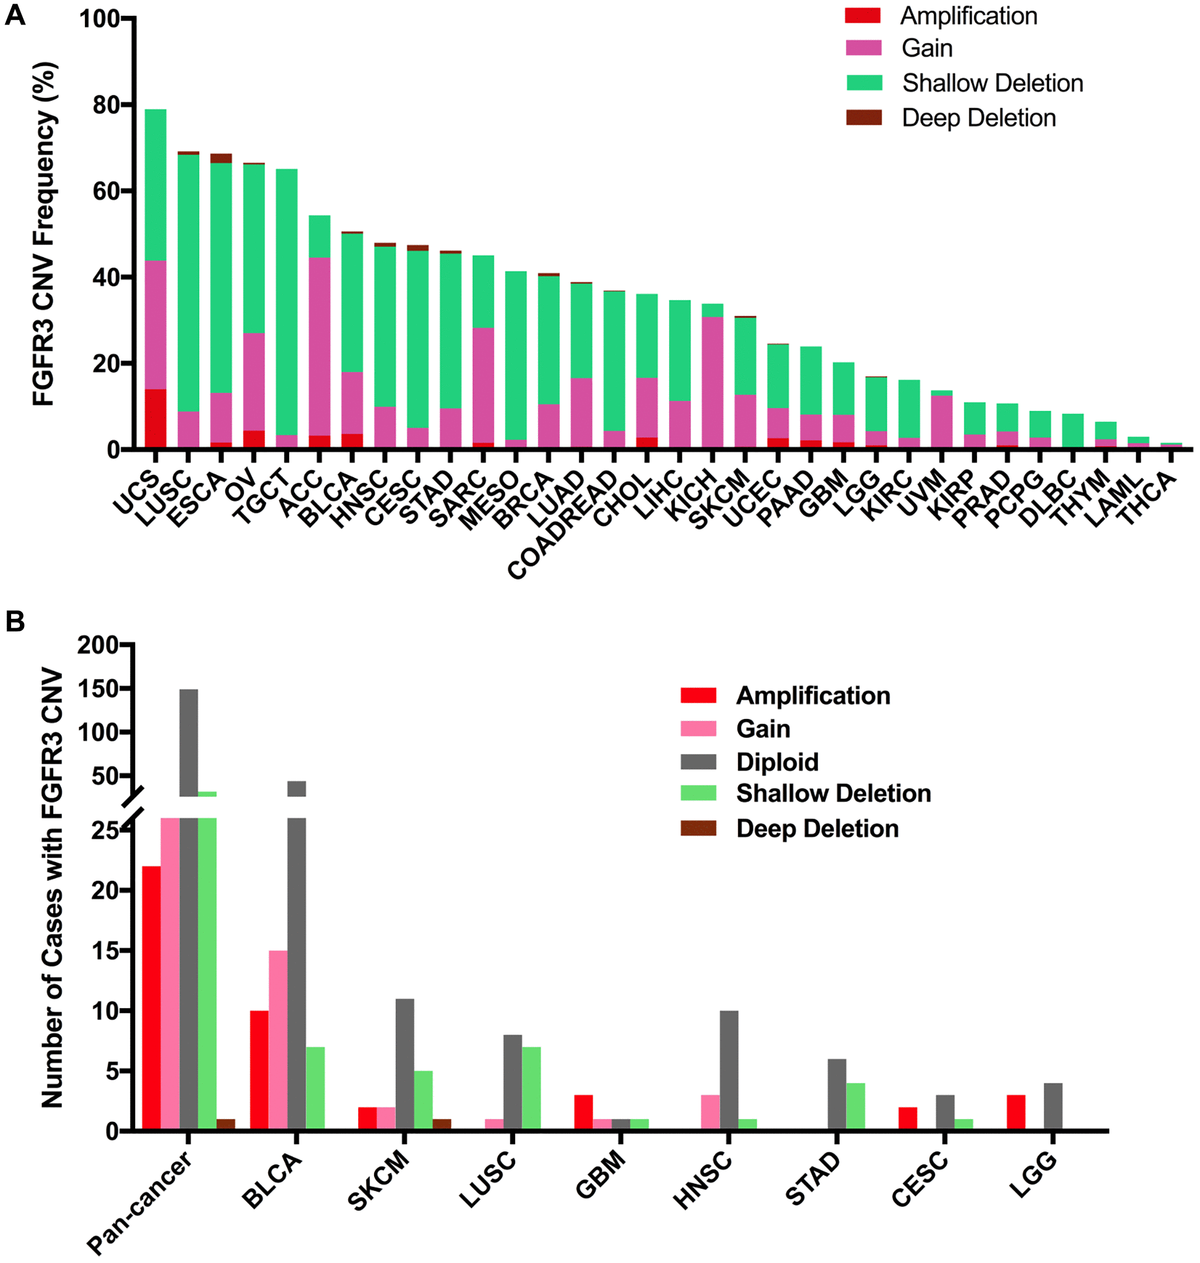 Pan-cancer analysis of FGFR3 Copy Number Variant (CNV). (A) The CNV frequency of FGFR3 across various tumor types. (B) FGFR3 CNV distribution in pan-cancer and the top eight tumors for the cases with FGFR3 mutations simultaneously.